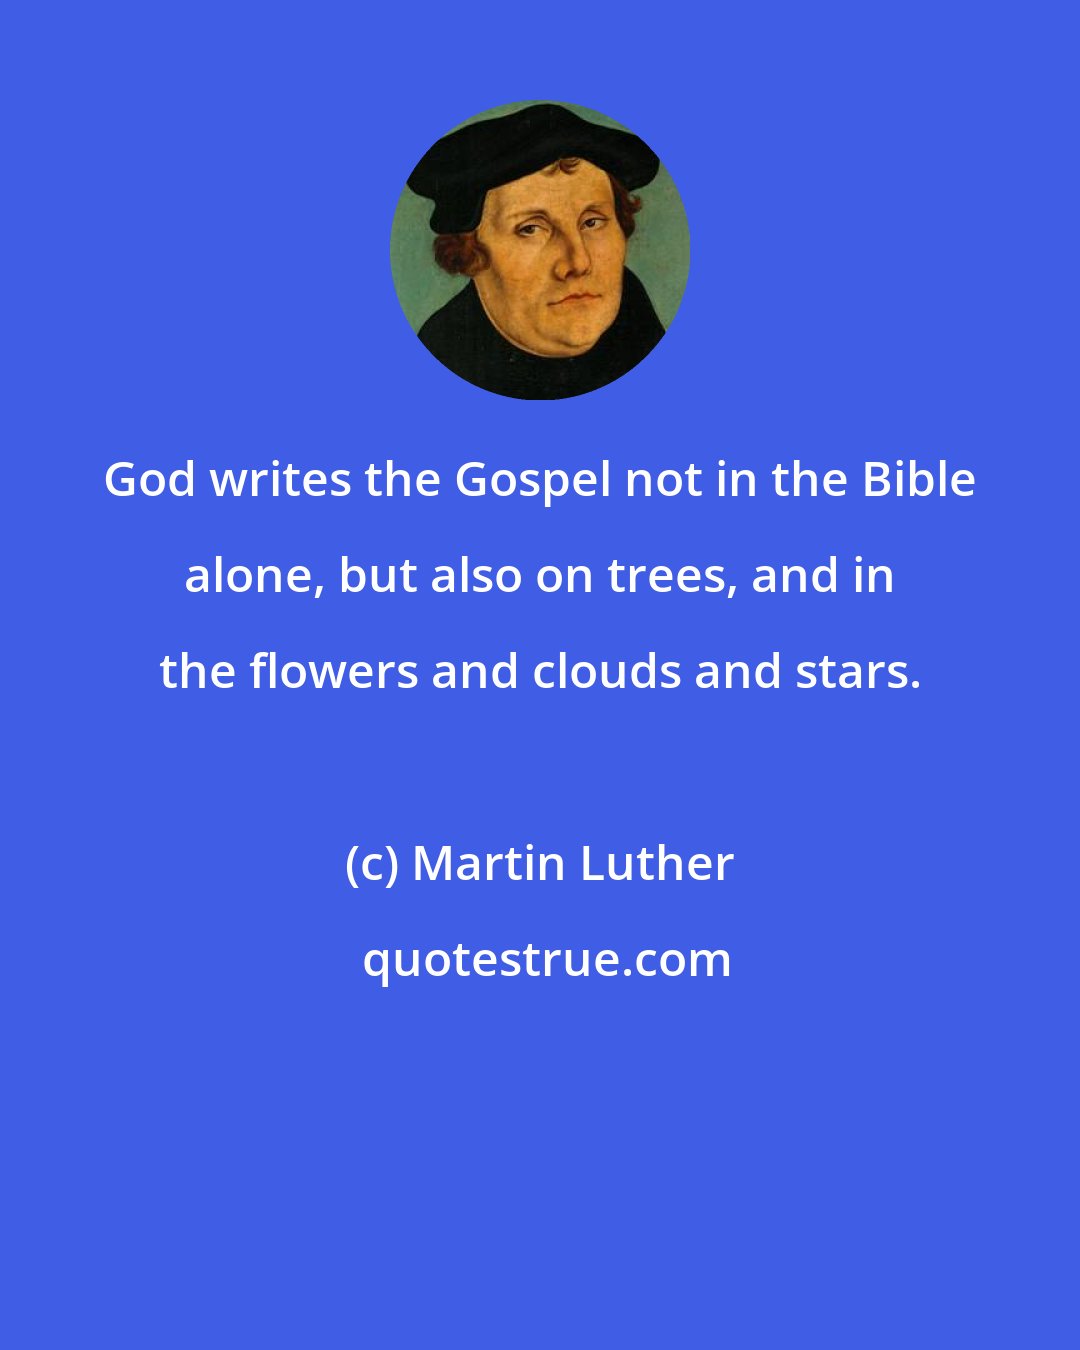 Martin Luther: God writes the Gospel not in the Bible alone, but also on trees, and in the flowers and clouds and stars.